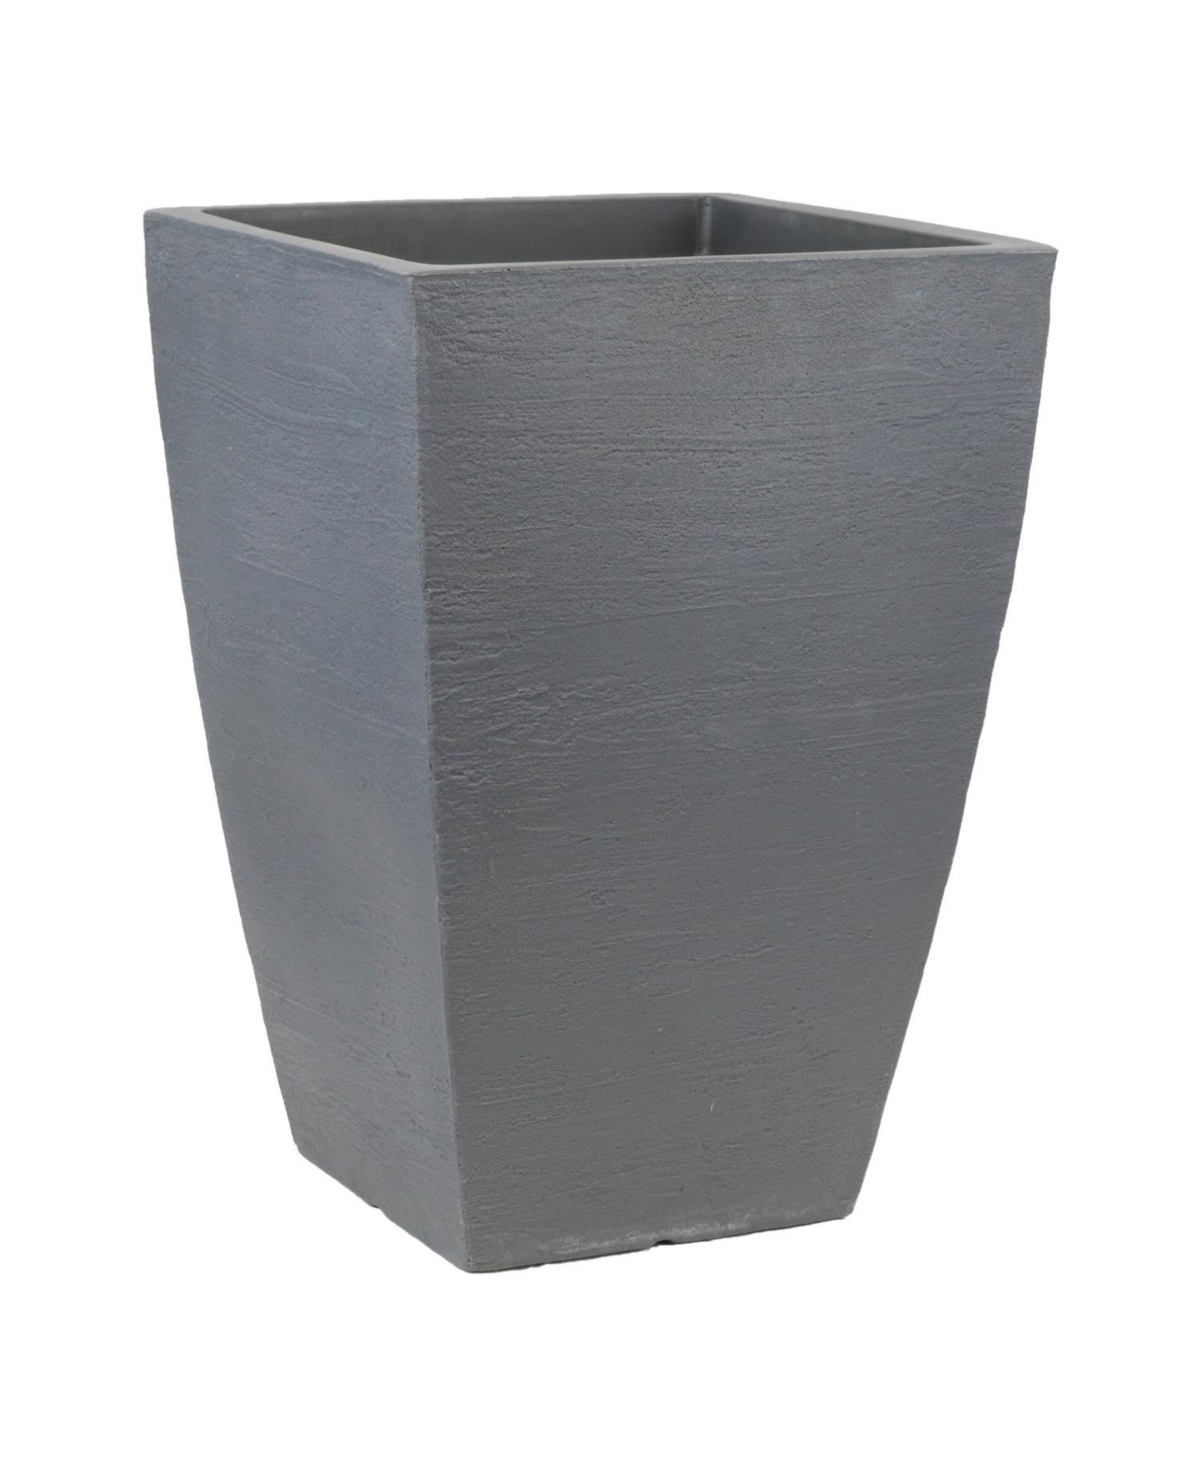 MSQT19SL Modern Planter Tall Square Slate, 12in x 19in - Gray